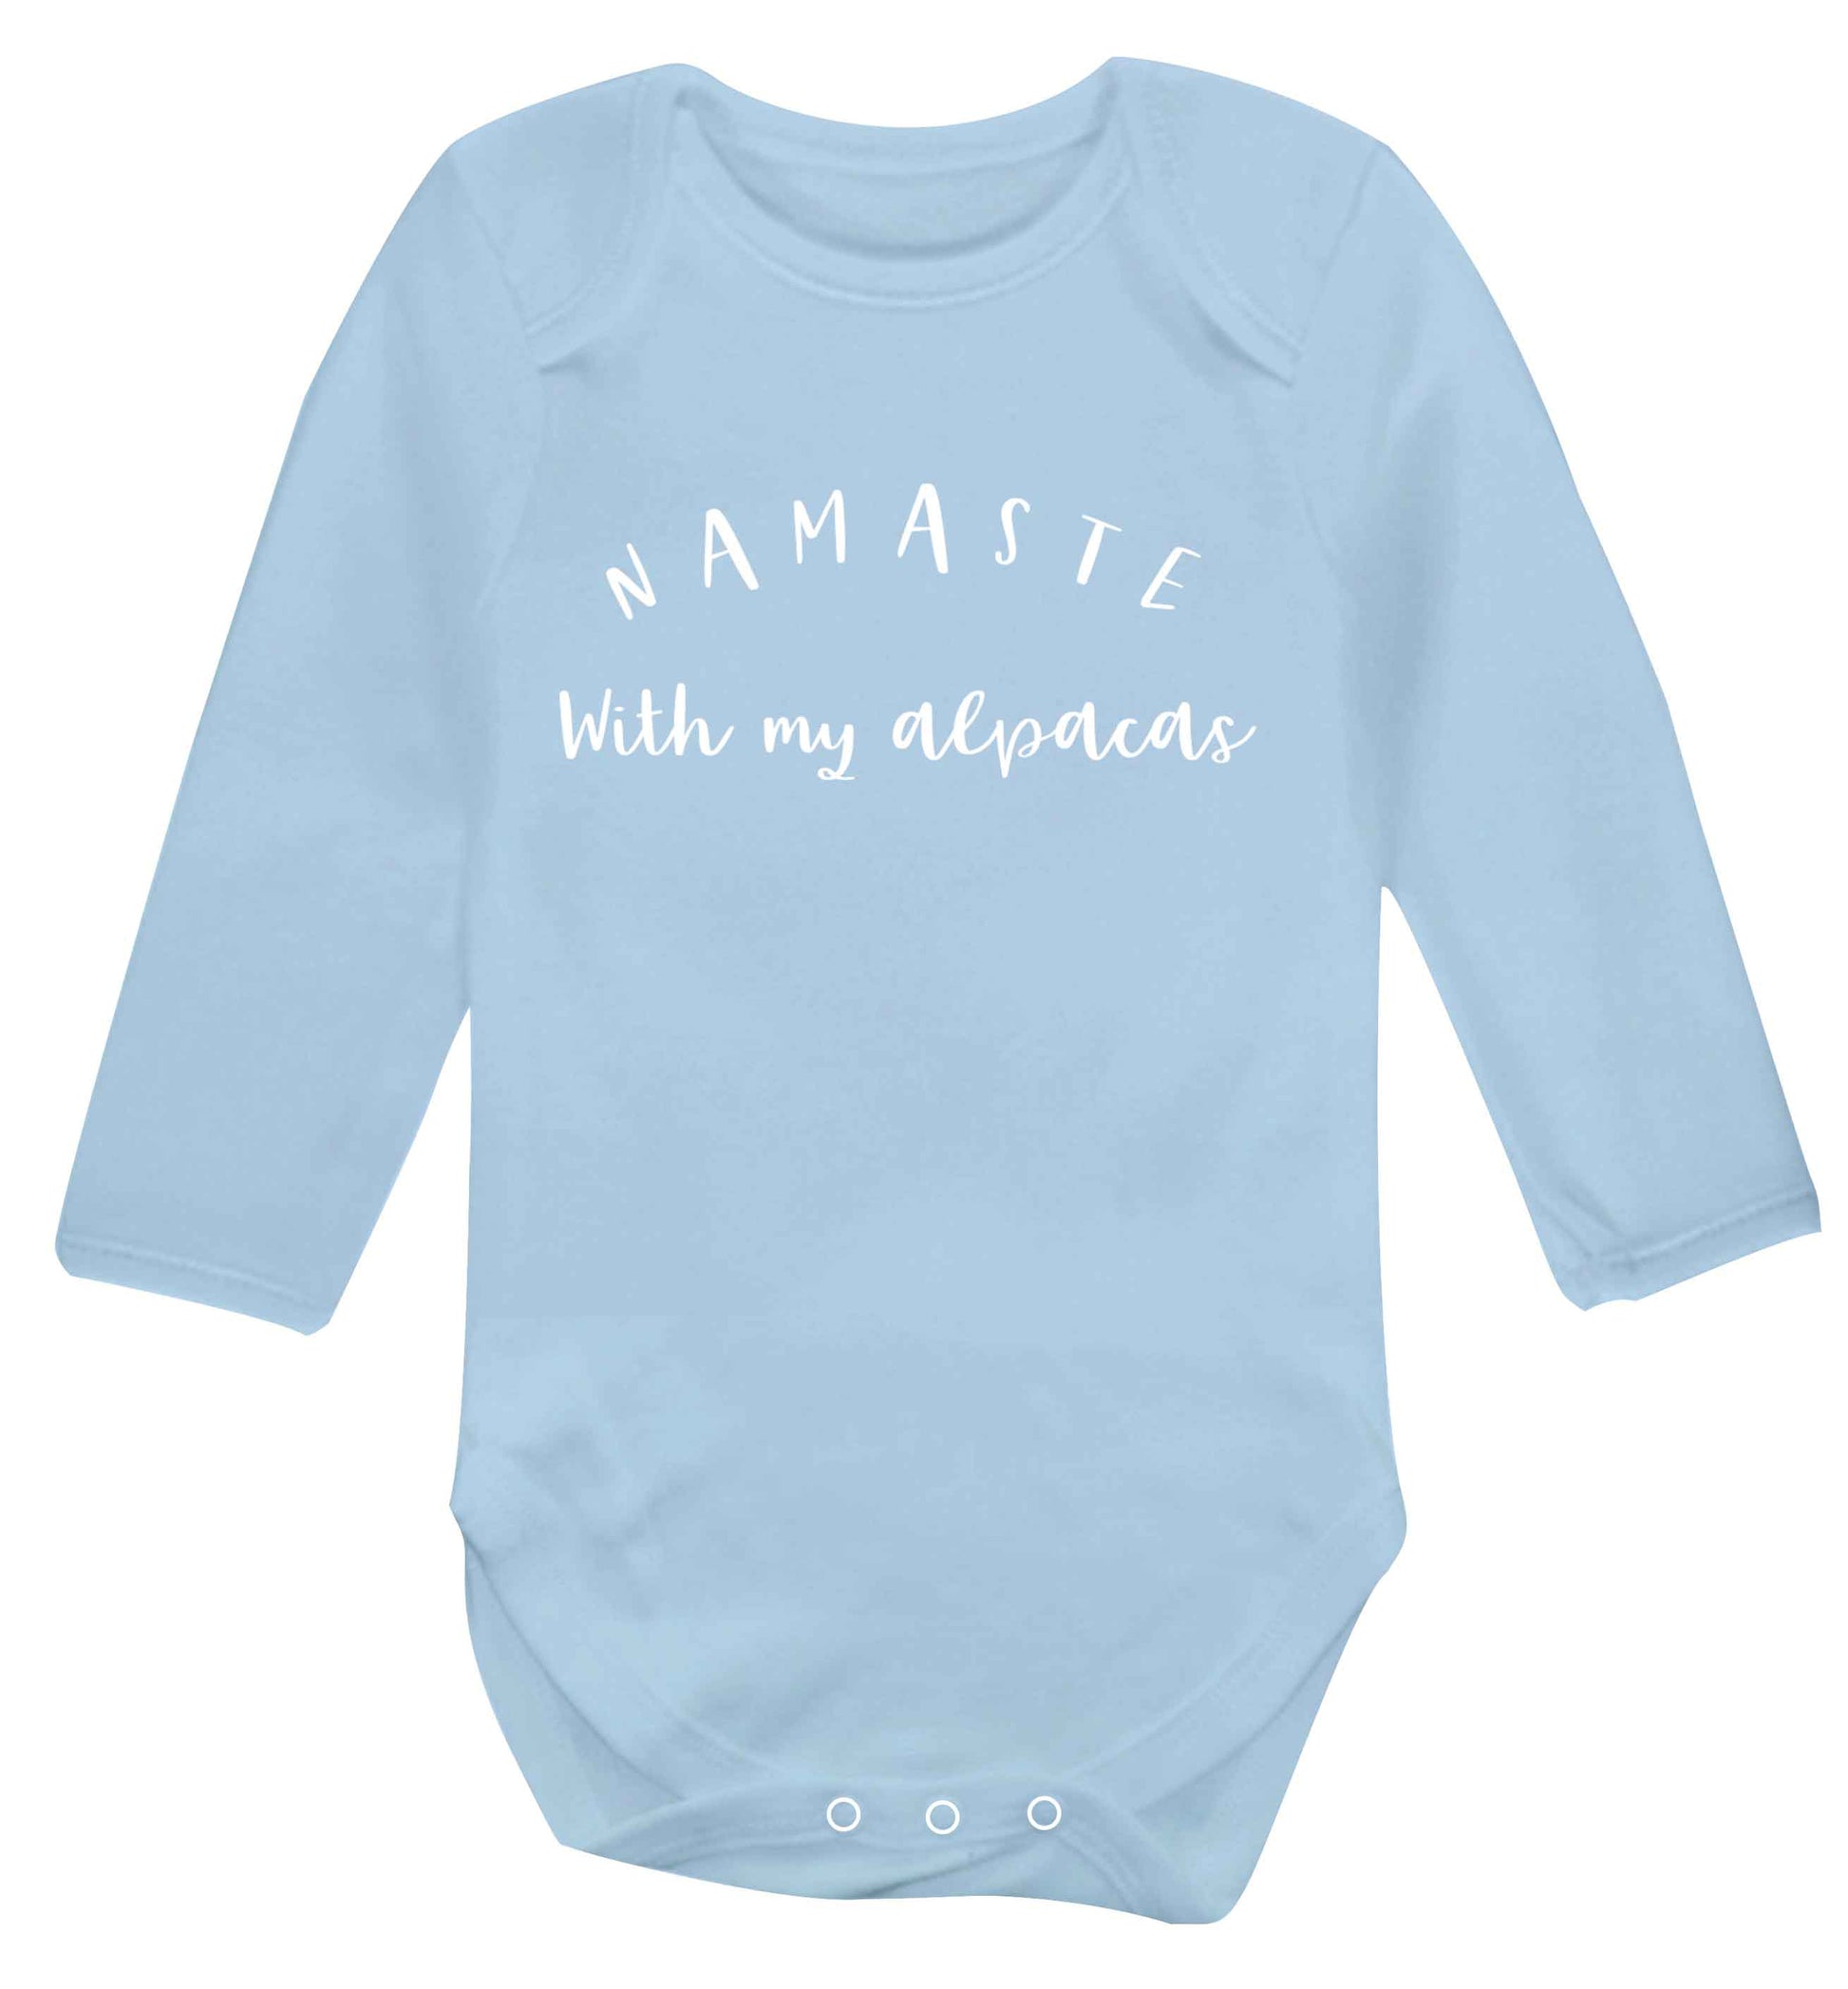 Namaste with my alpacas Baby Vest long sleeved pale blue 6-12 months